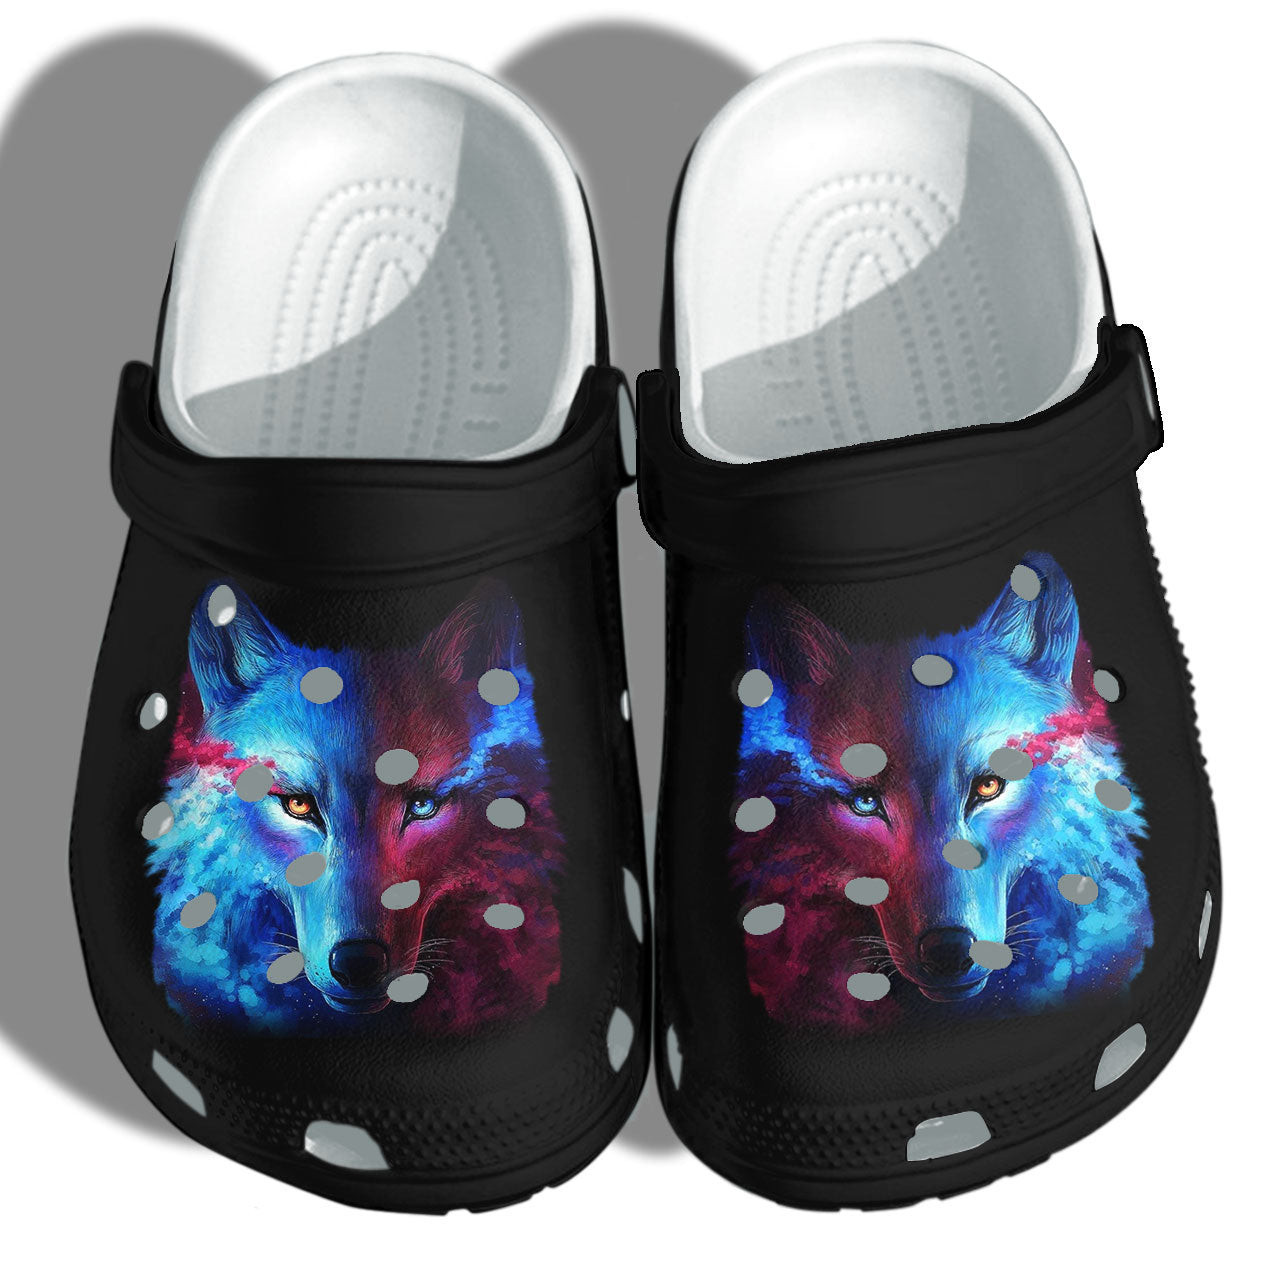 Mystery Wolf Fantasy Cool Crocs Shoes - Wolf Lover Crocbland Clog Birthday Gifts For Men Women